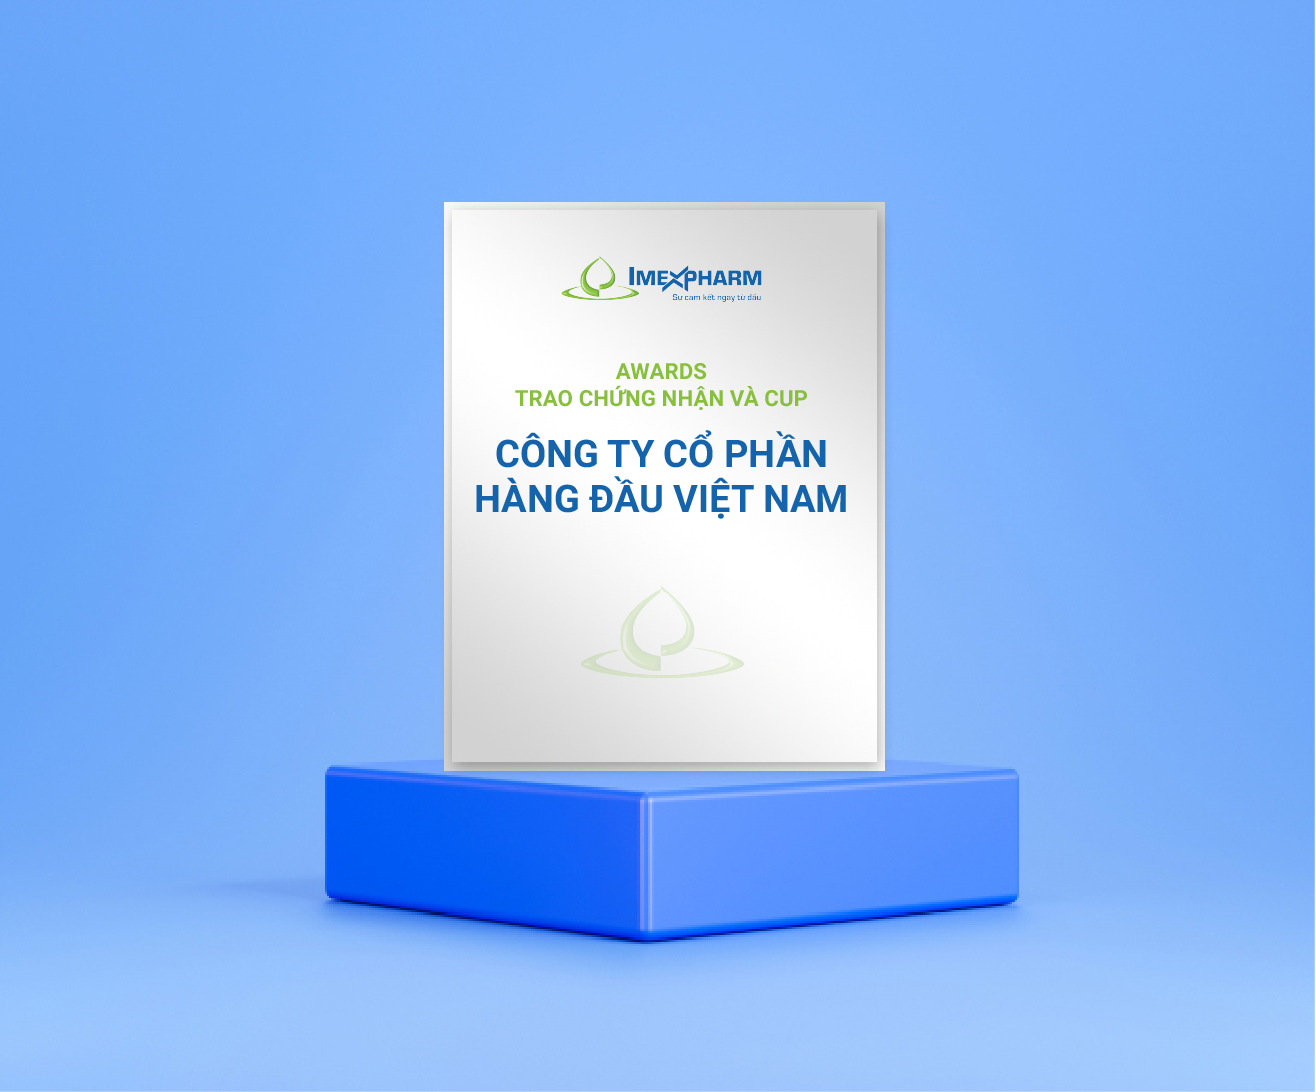 AWARDS awarded certificate and cup "Leading Joint Stock Company in Vietnam"